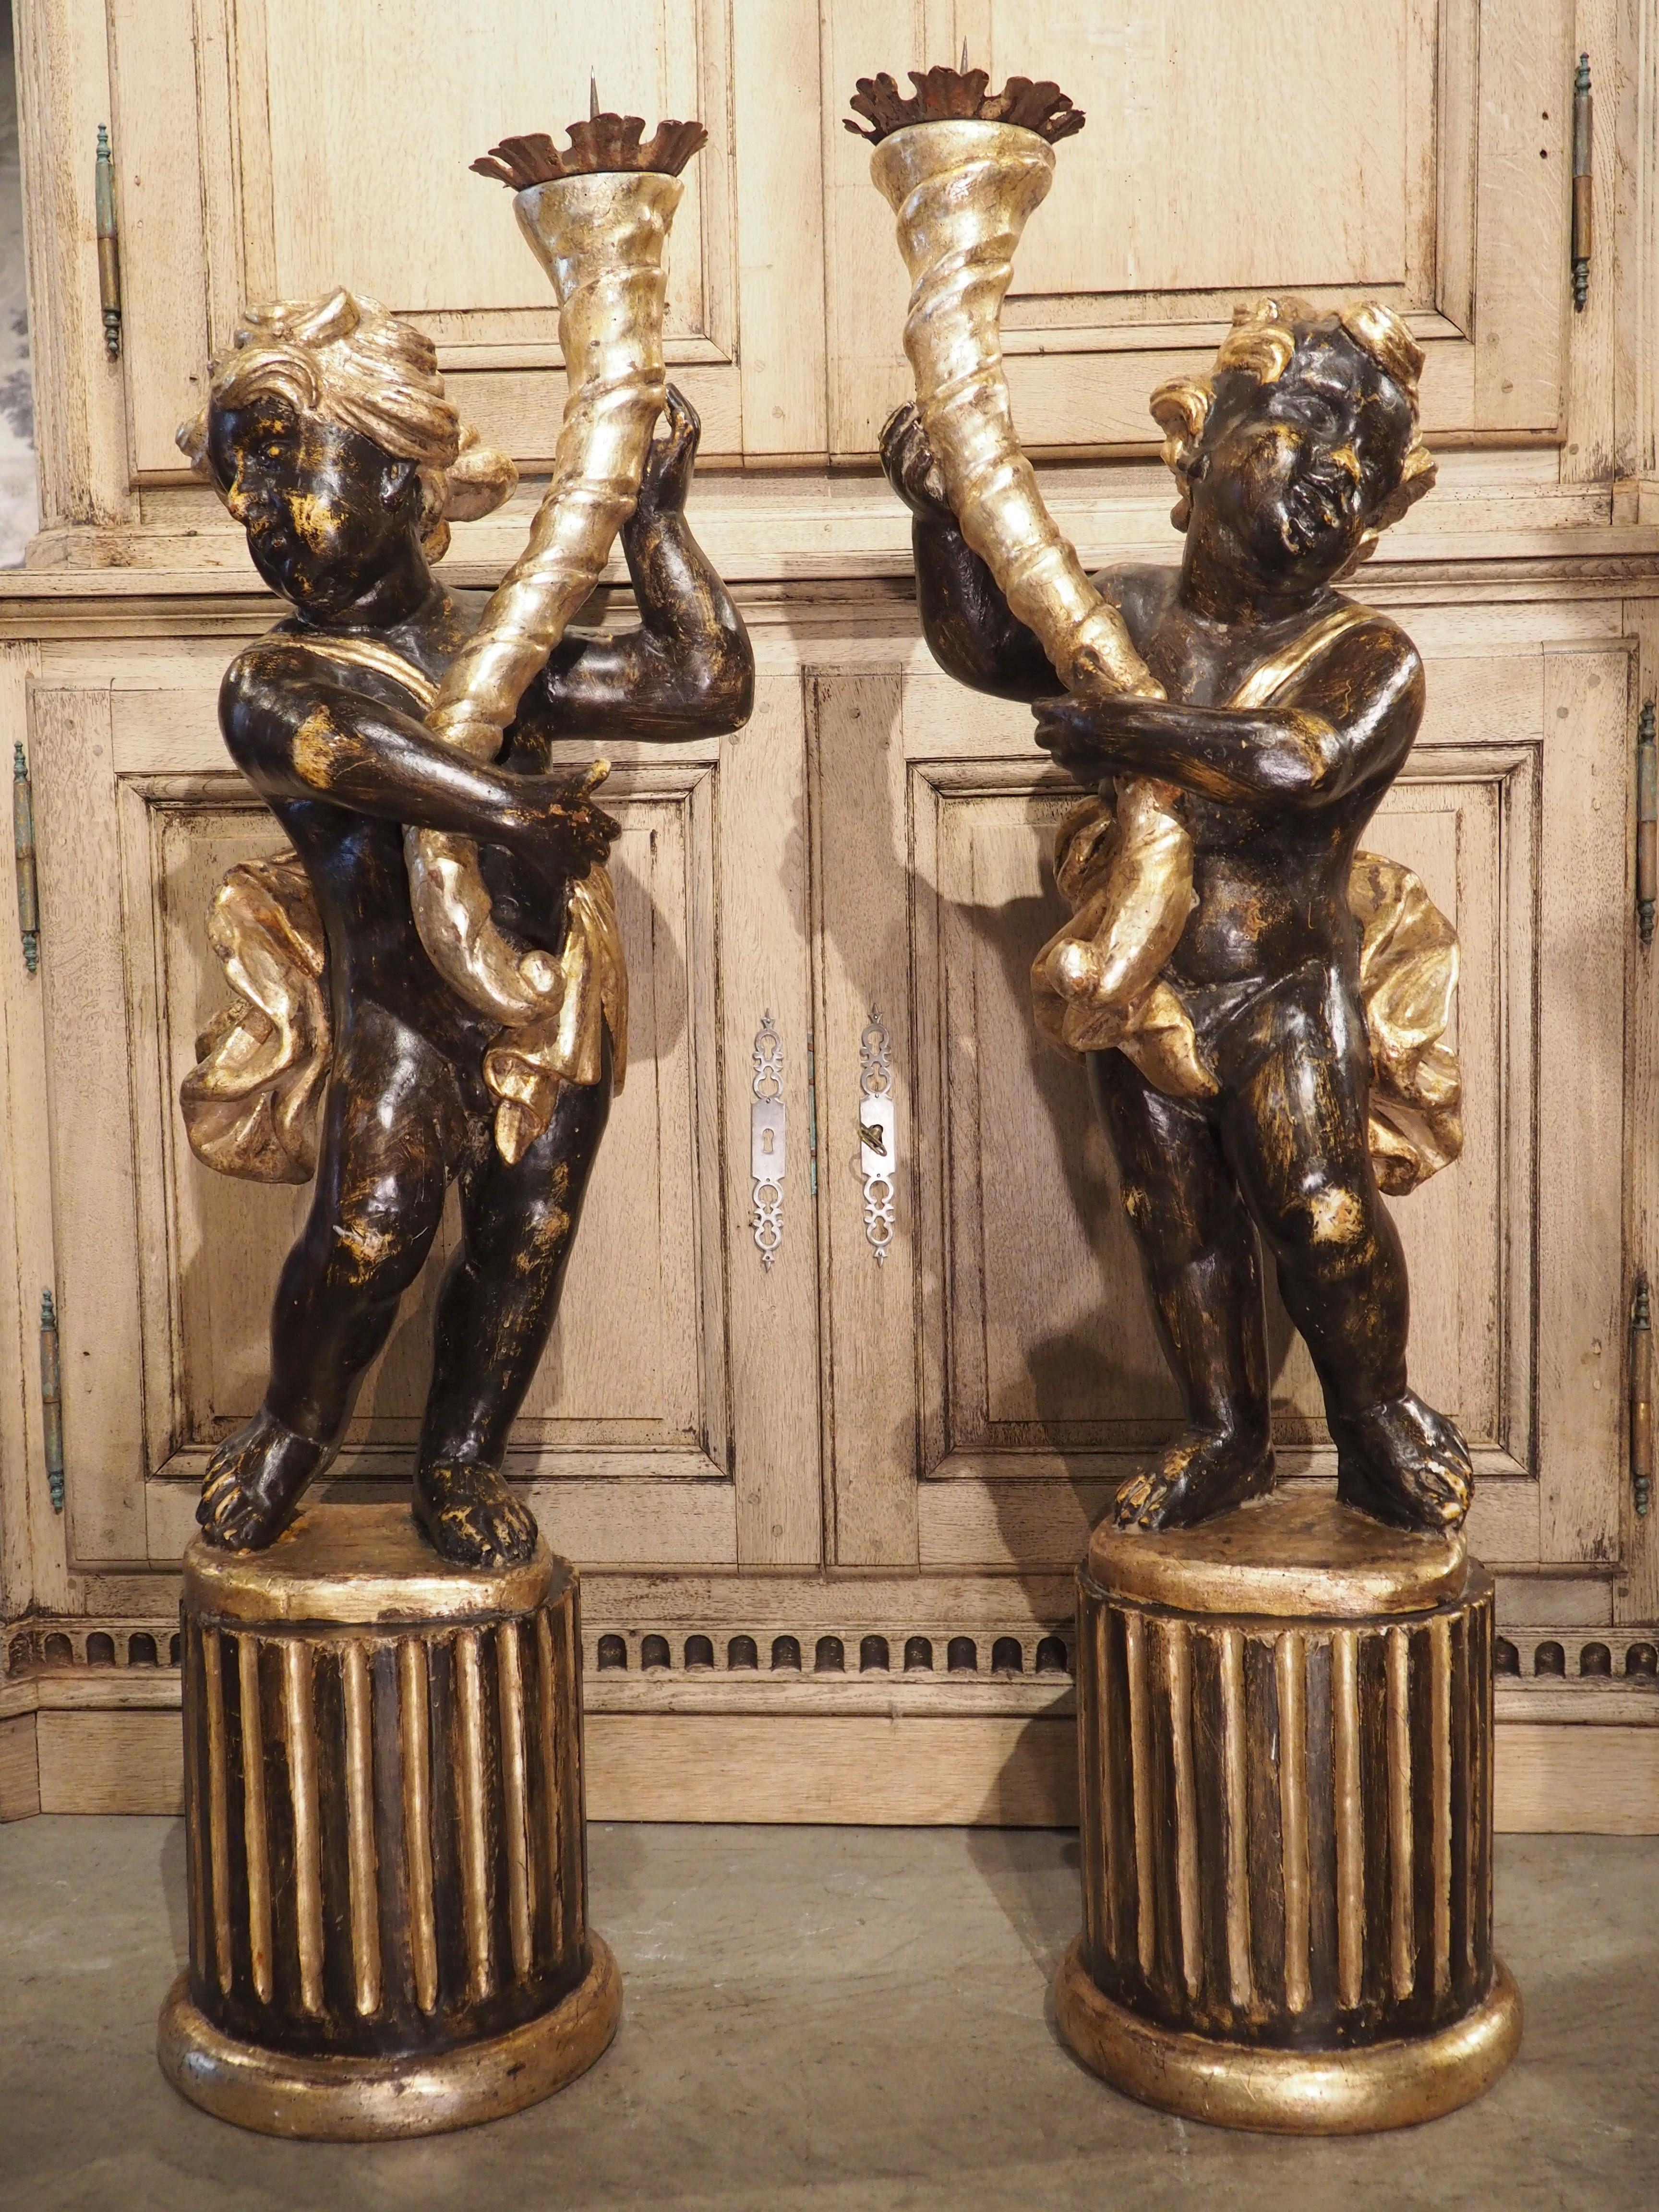 Standing at just under 4 feet high and hand-carved in Italy during the 1700’s, this fabulous pair of hand-painted and gilt putti torcheres have sinuous cornucopia columns. Each putto is depicted standing contrapposto on top of a brown Doric order